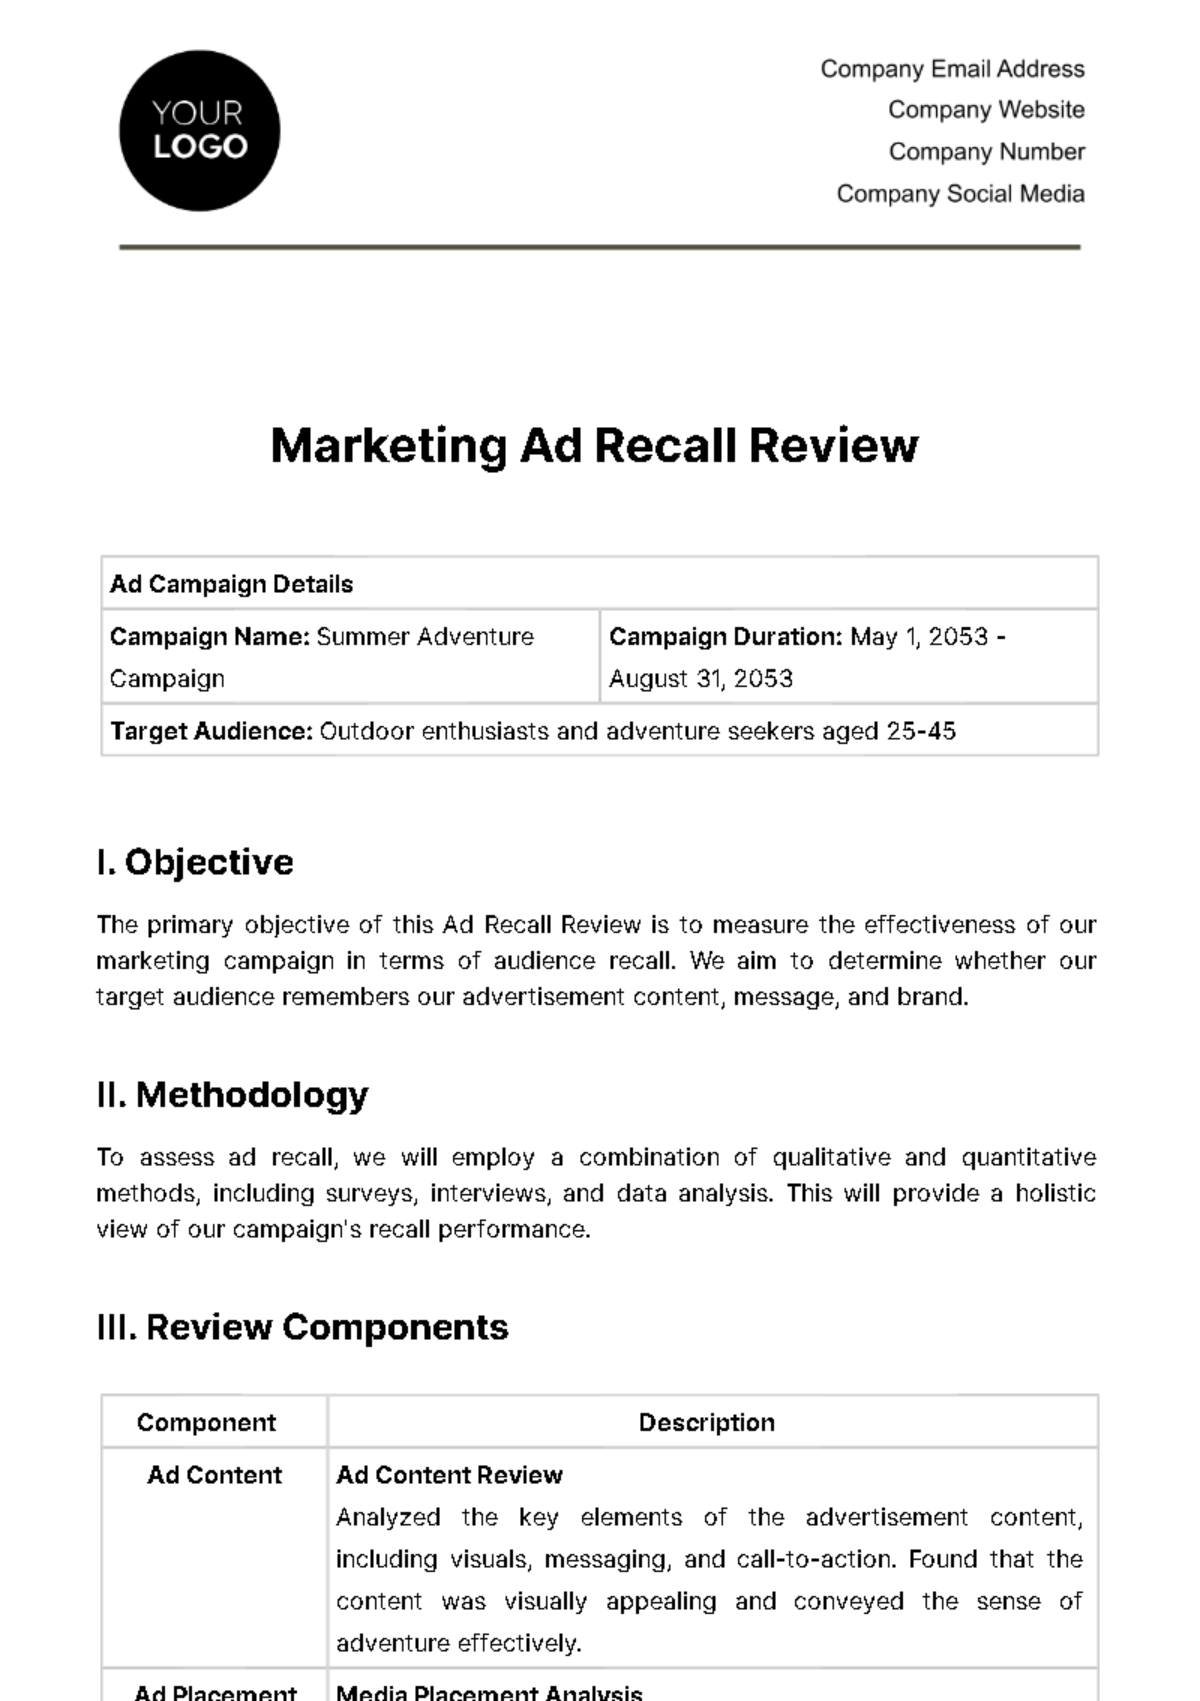 Free Marketing Ad Recall Review Template